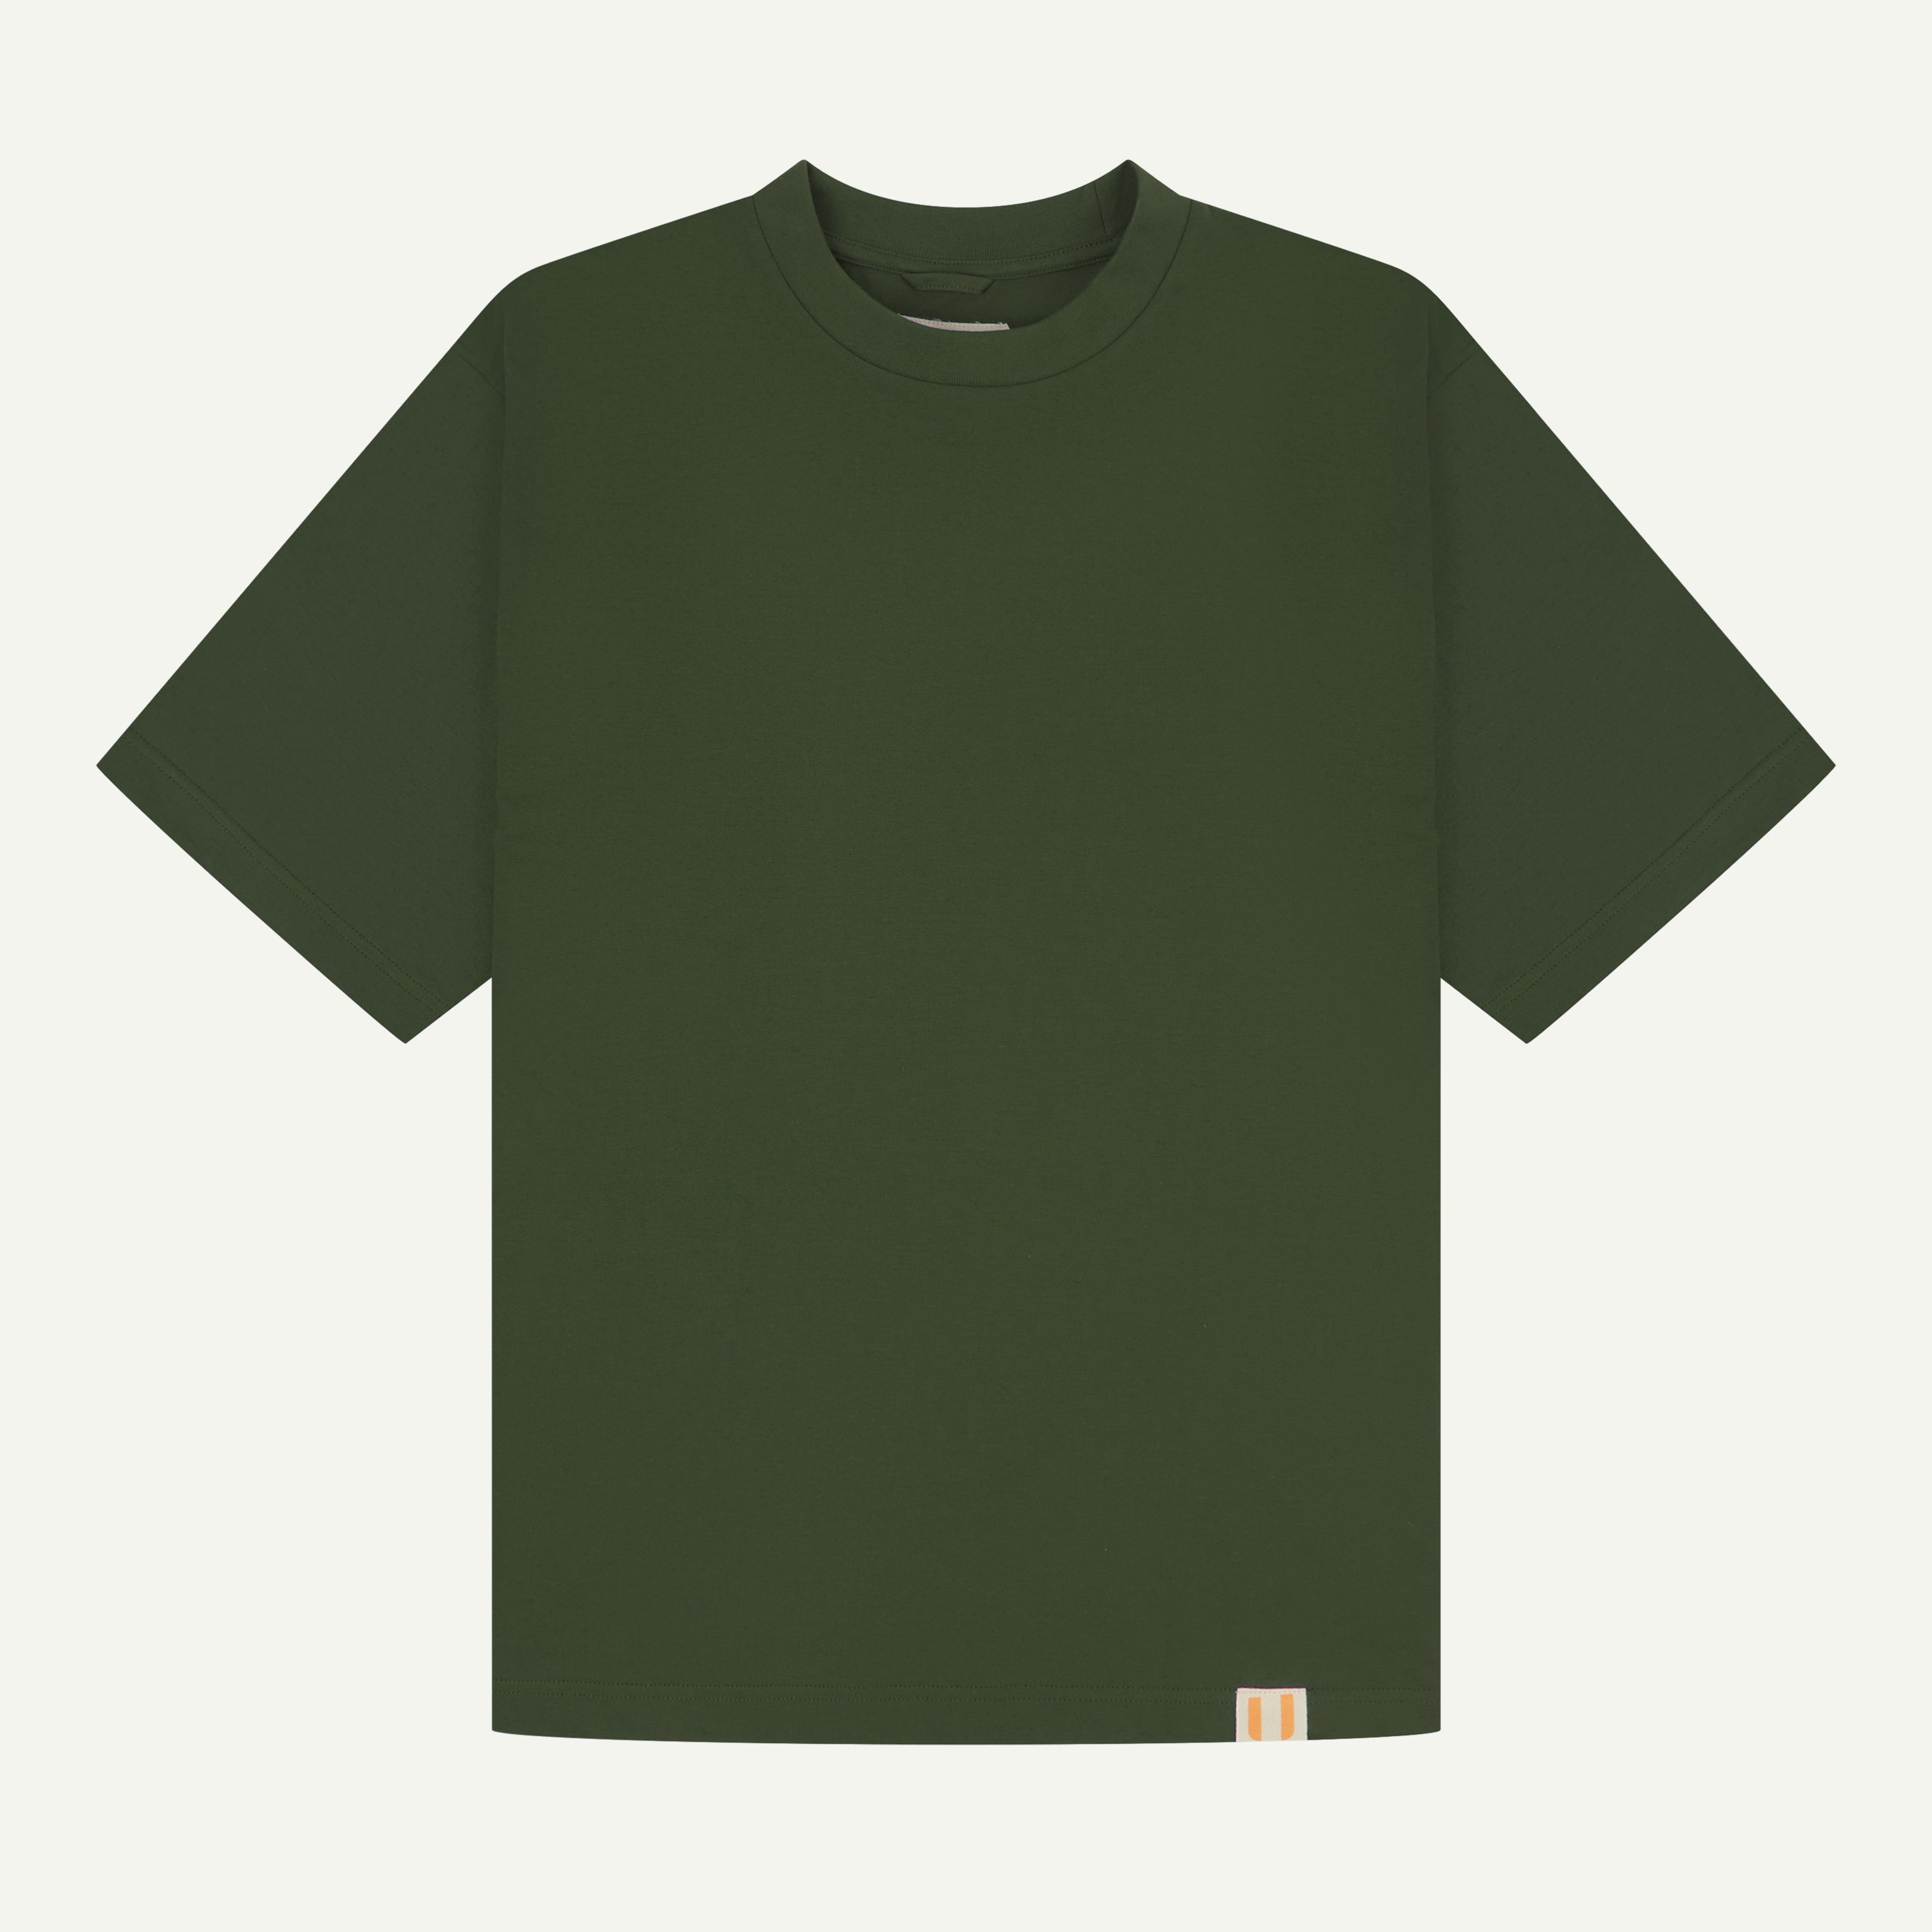 Front flat view of mid-green oversized  organic cotton Tee by Uskees showing the brand logo.